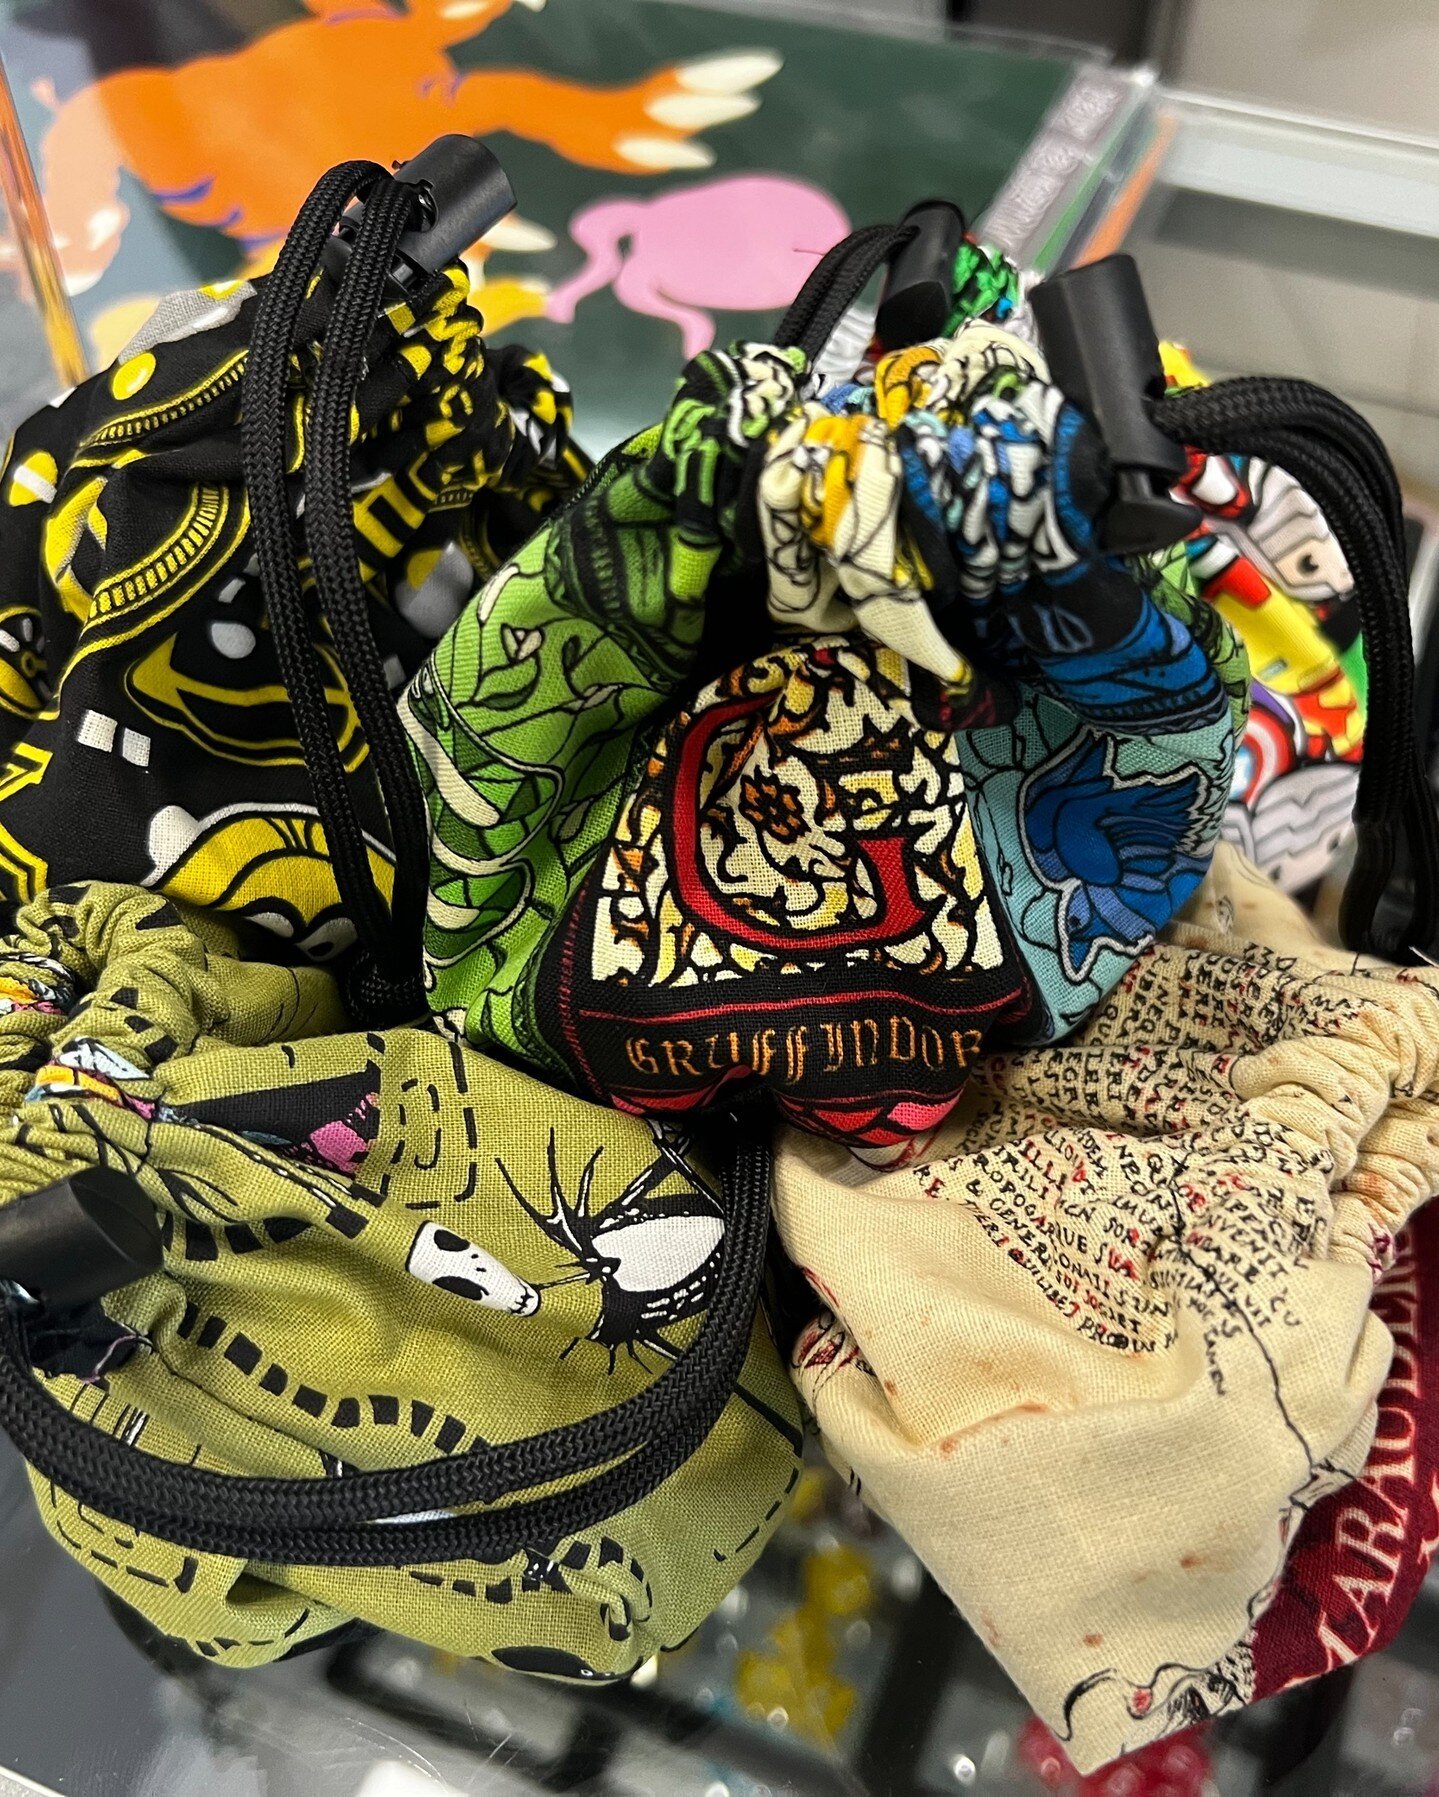 Dice and dice bags for all your needs. Many colors and styles available at The Green.